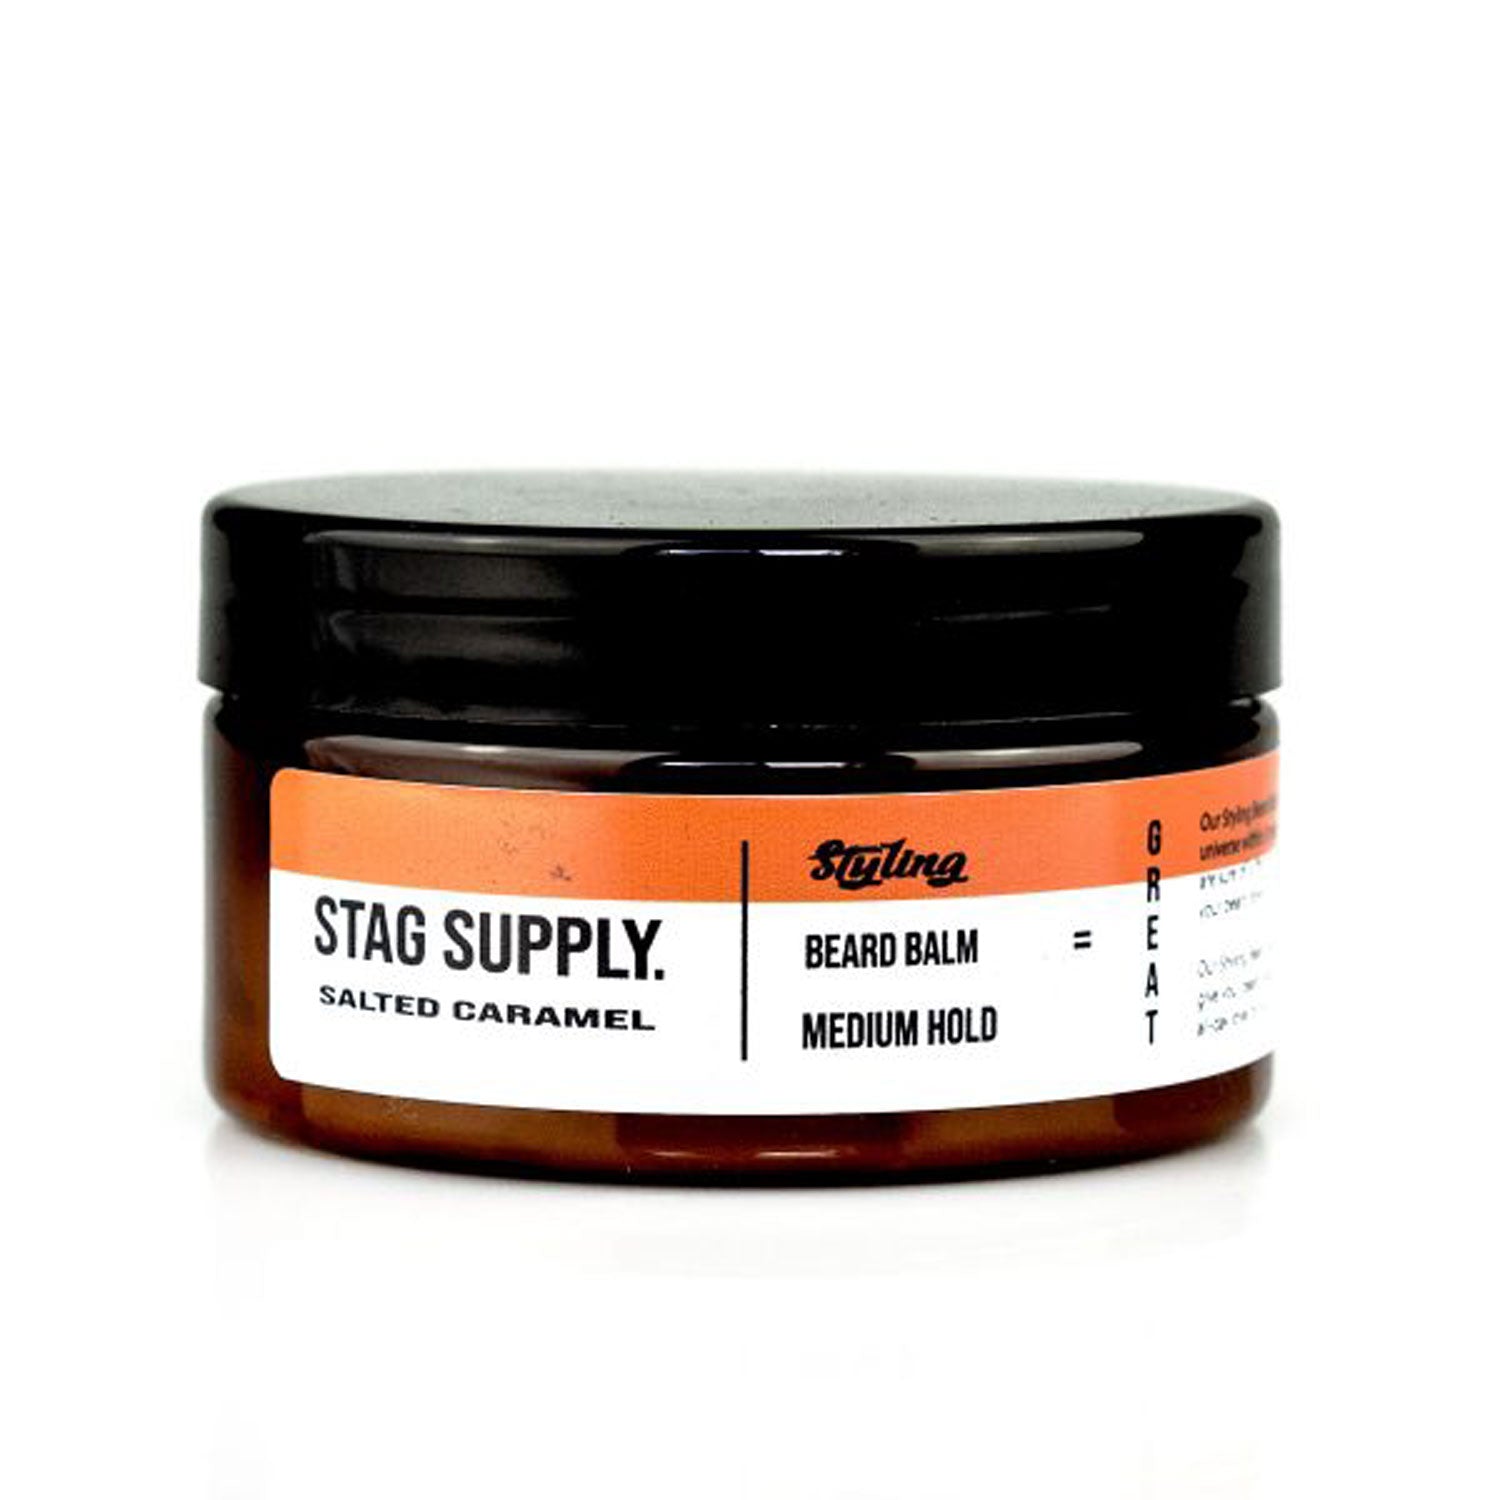 Stag Supply Styling Beard Balm Salted Caramel 100ml - Orcadia